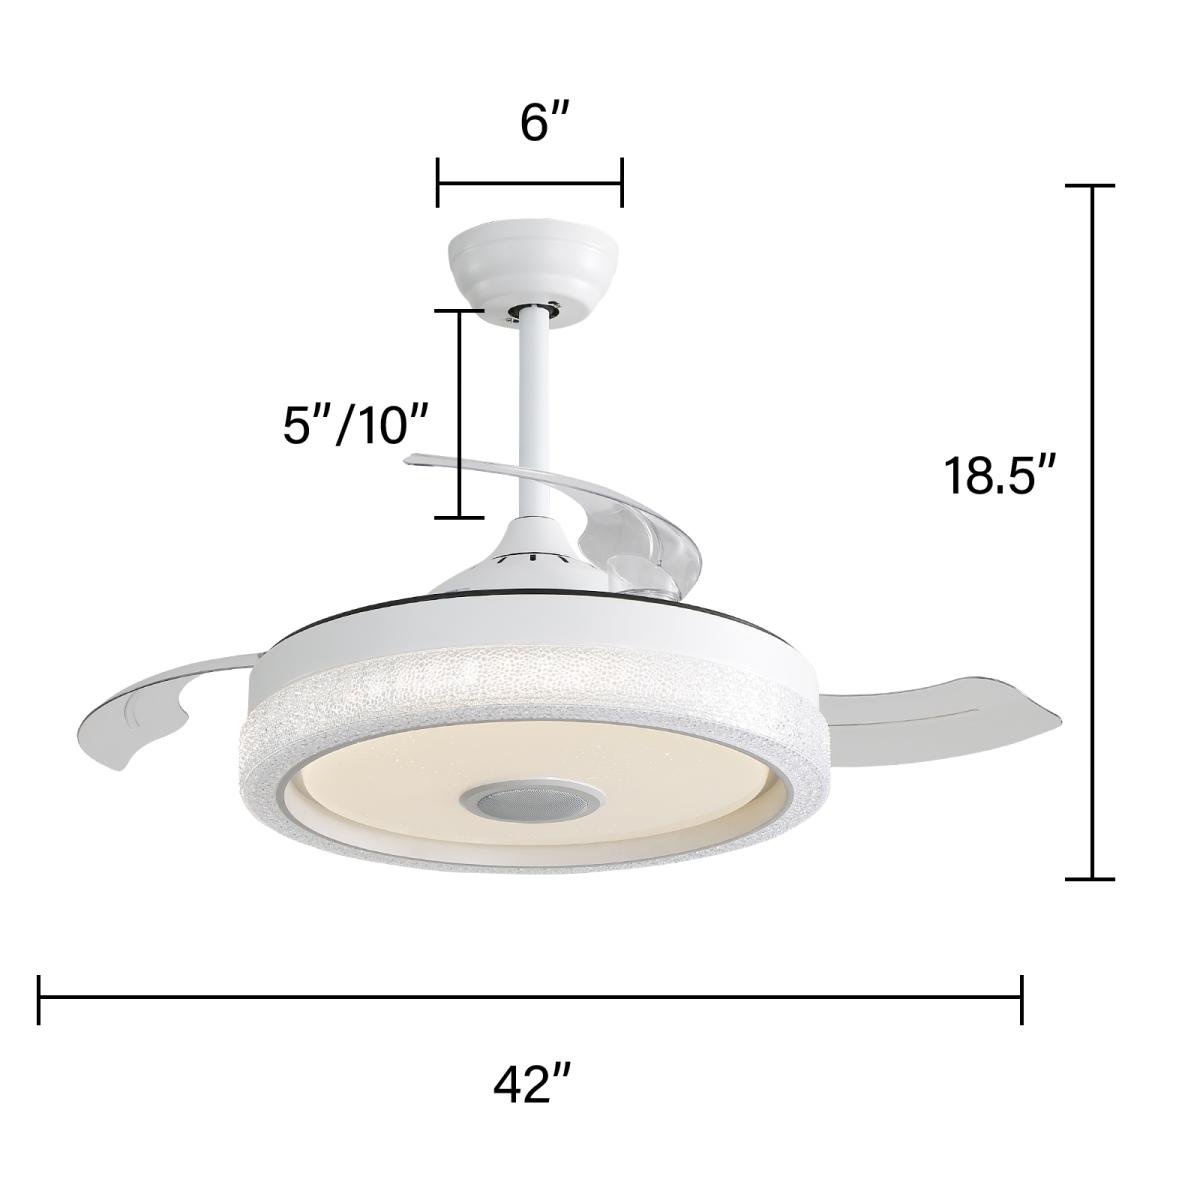 42 Inch Modern Invisible Ceiling Fan, 120v 3 Abs Blades Remote Control Reversible Dc Motor, With 36w Led Light Smart App Control, Past Etl Ceiling Fan